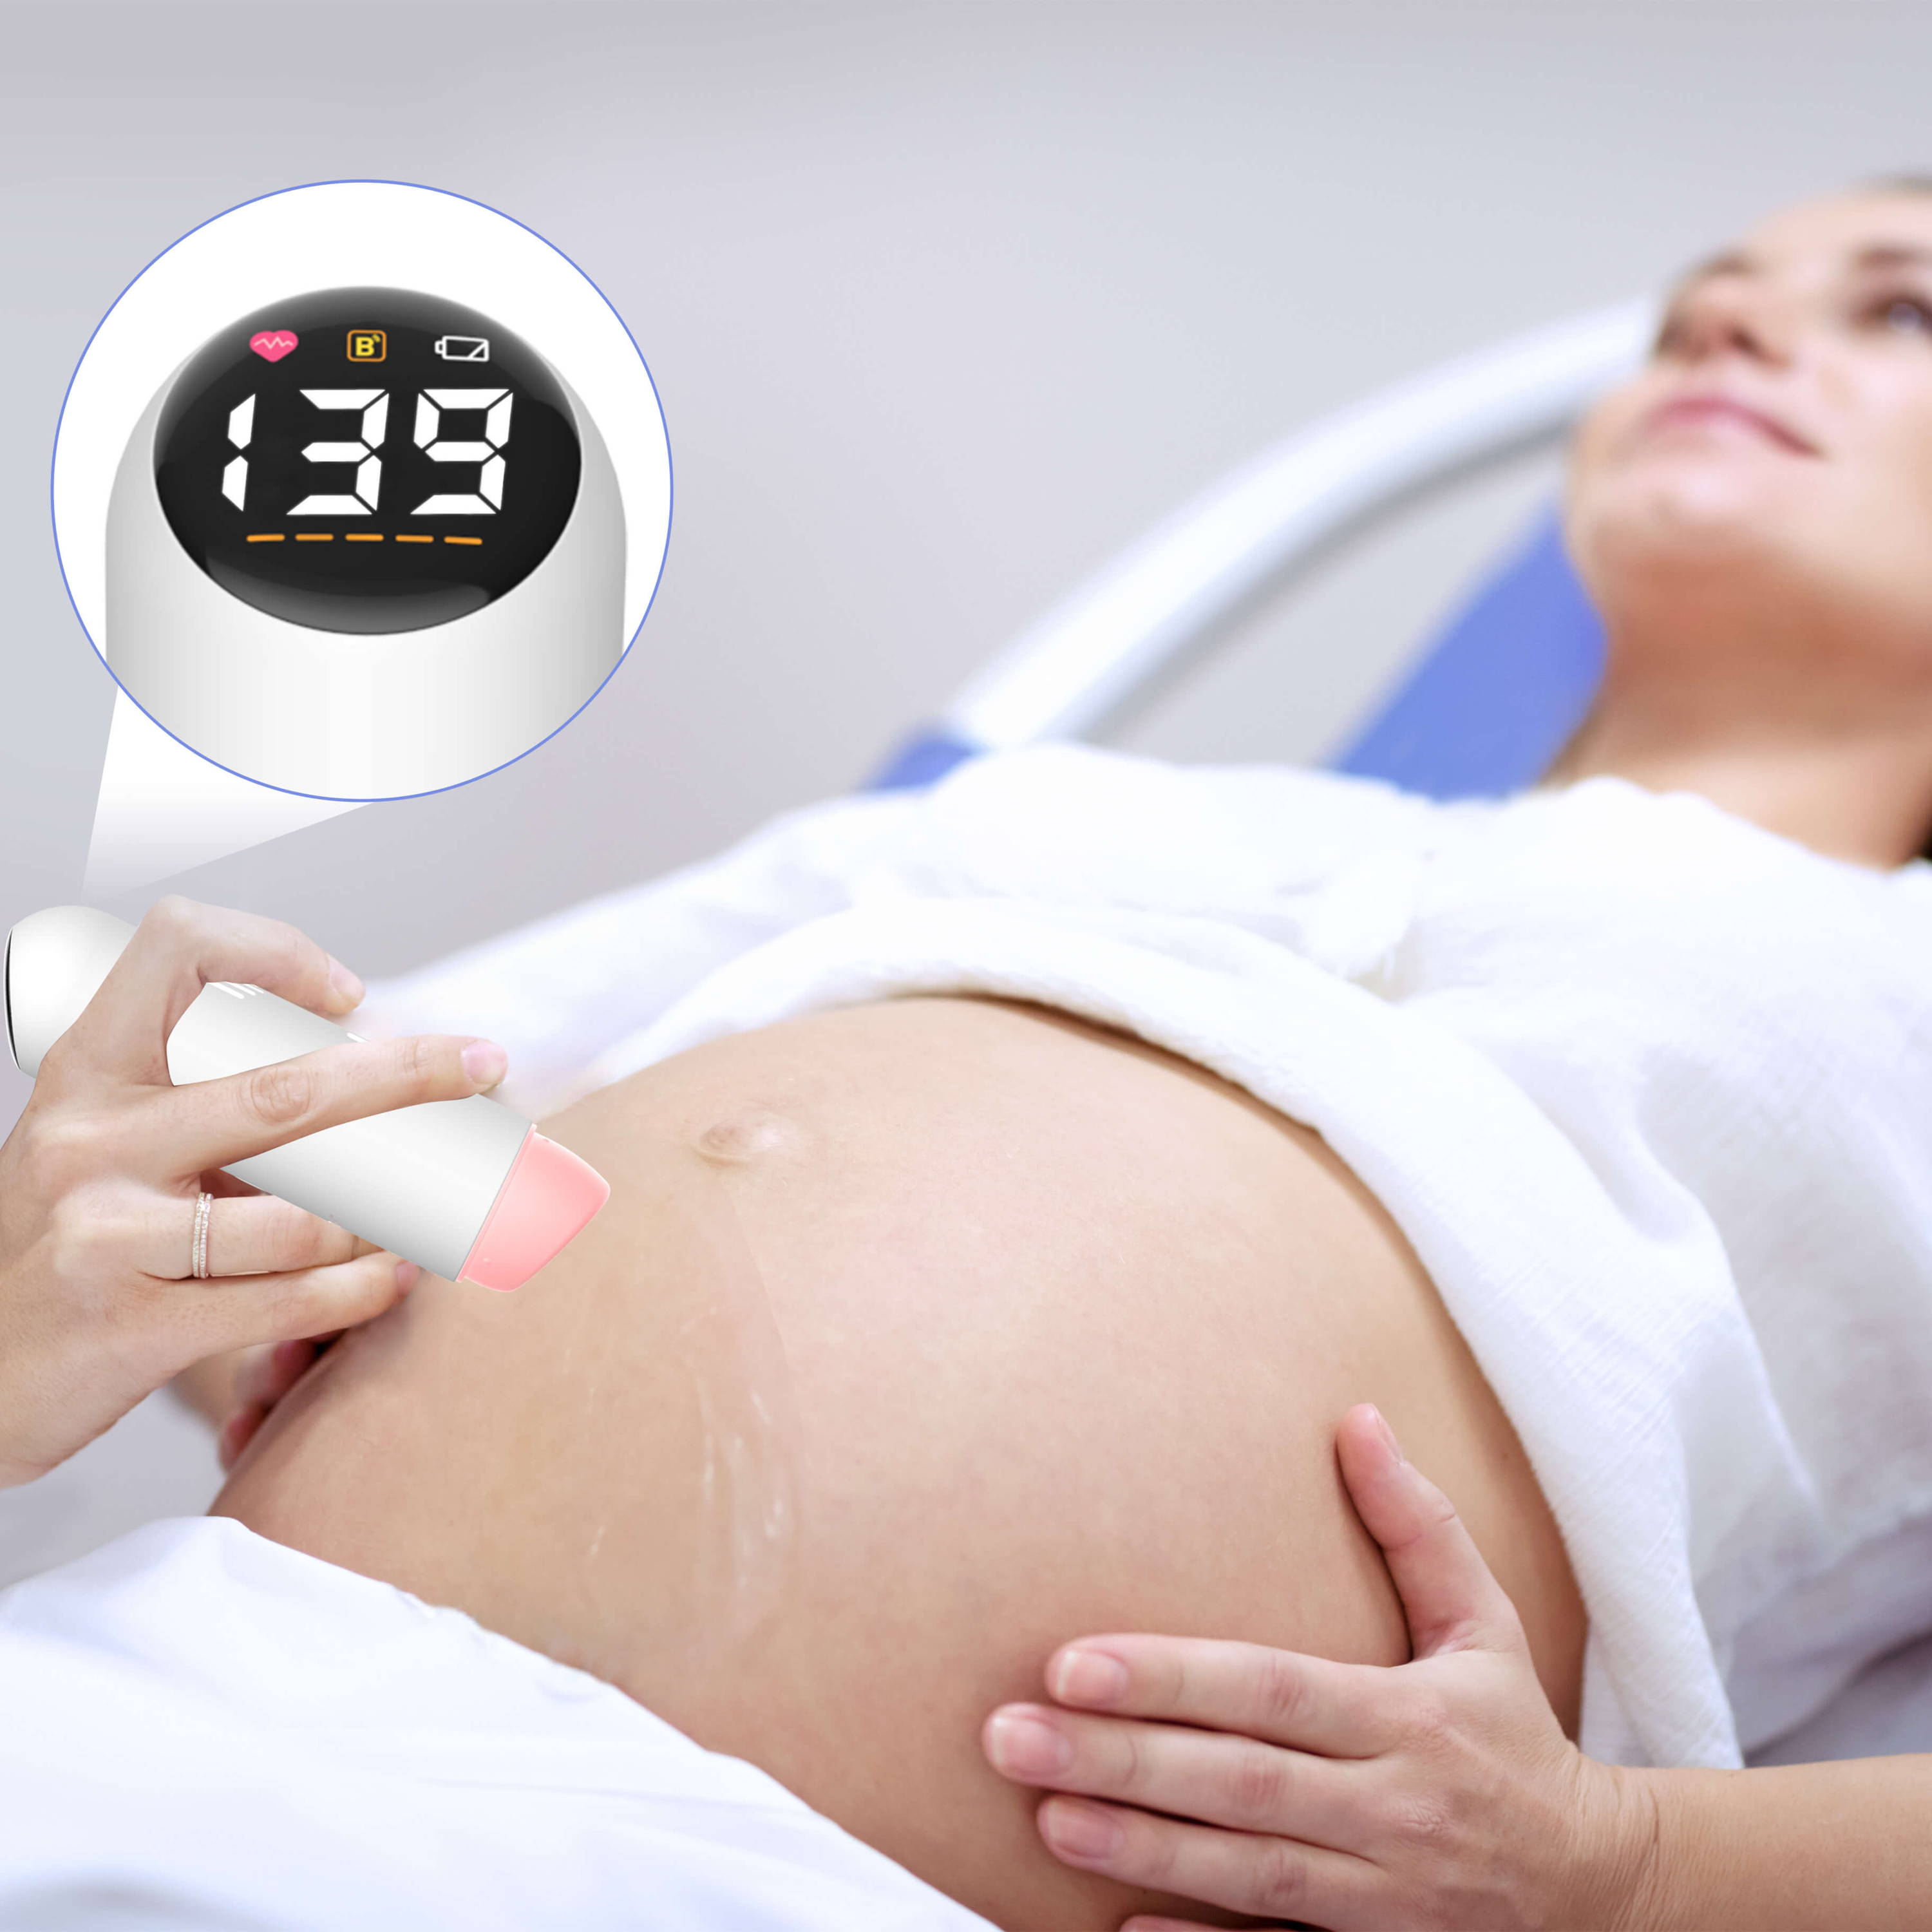 fetal heart monitor with LED display, high-quality LED display